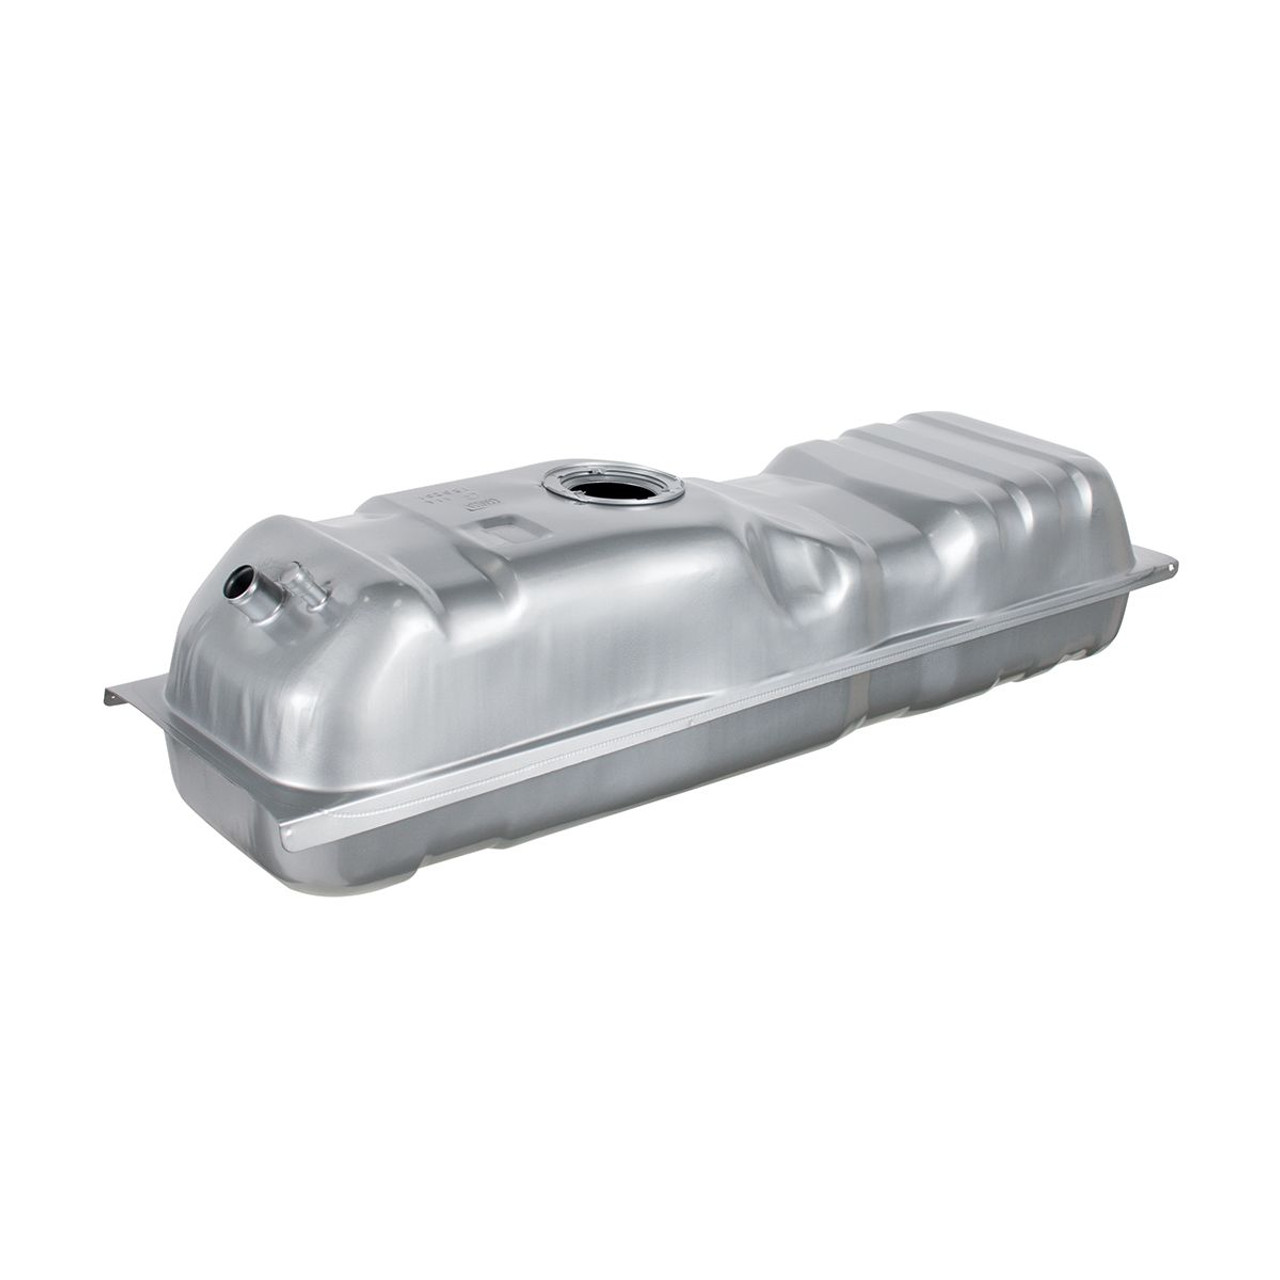 United Pacific 16 Gallon Steel Zinc Plated Fuel Tank For 1973-81 Chevy & GMC C/K Series Truck